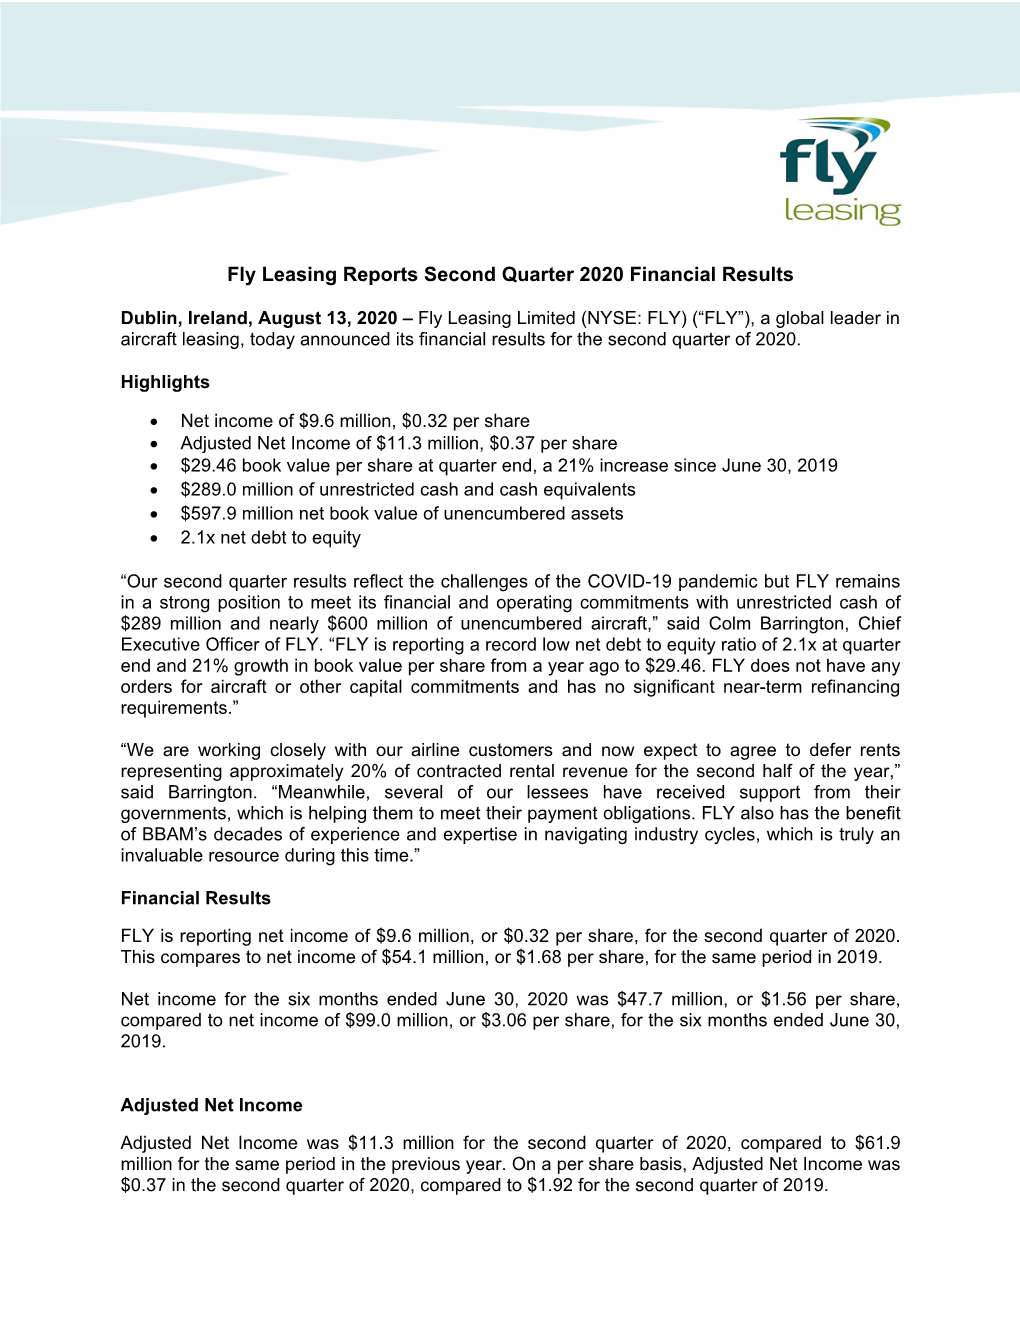 Fly Leasing Reports Second Quarter 2020 Financial Results